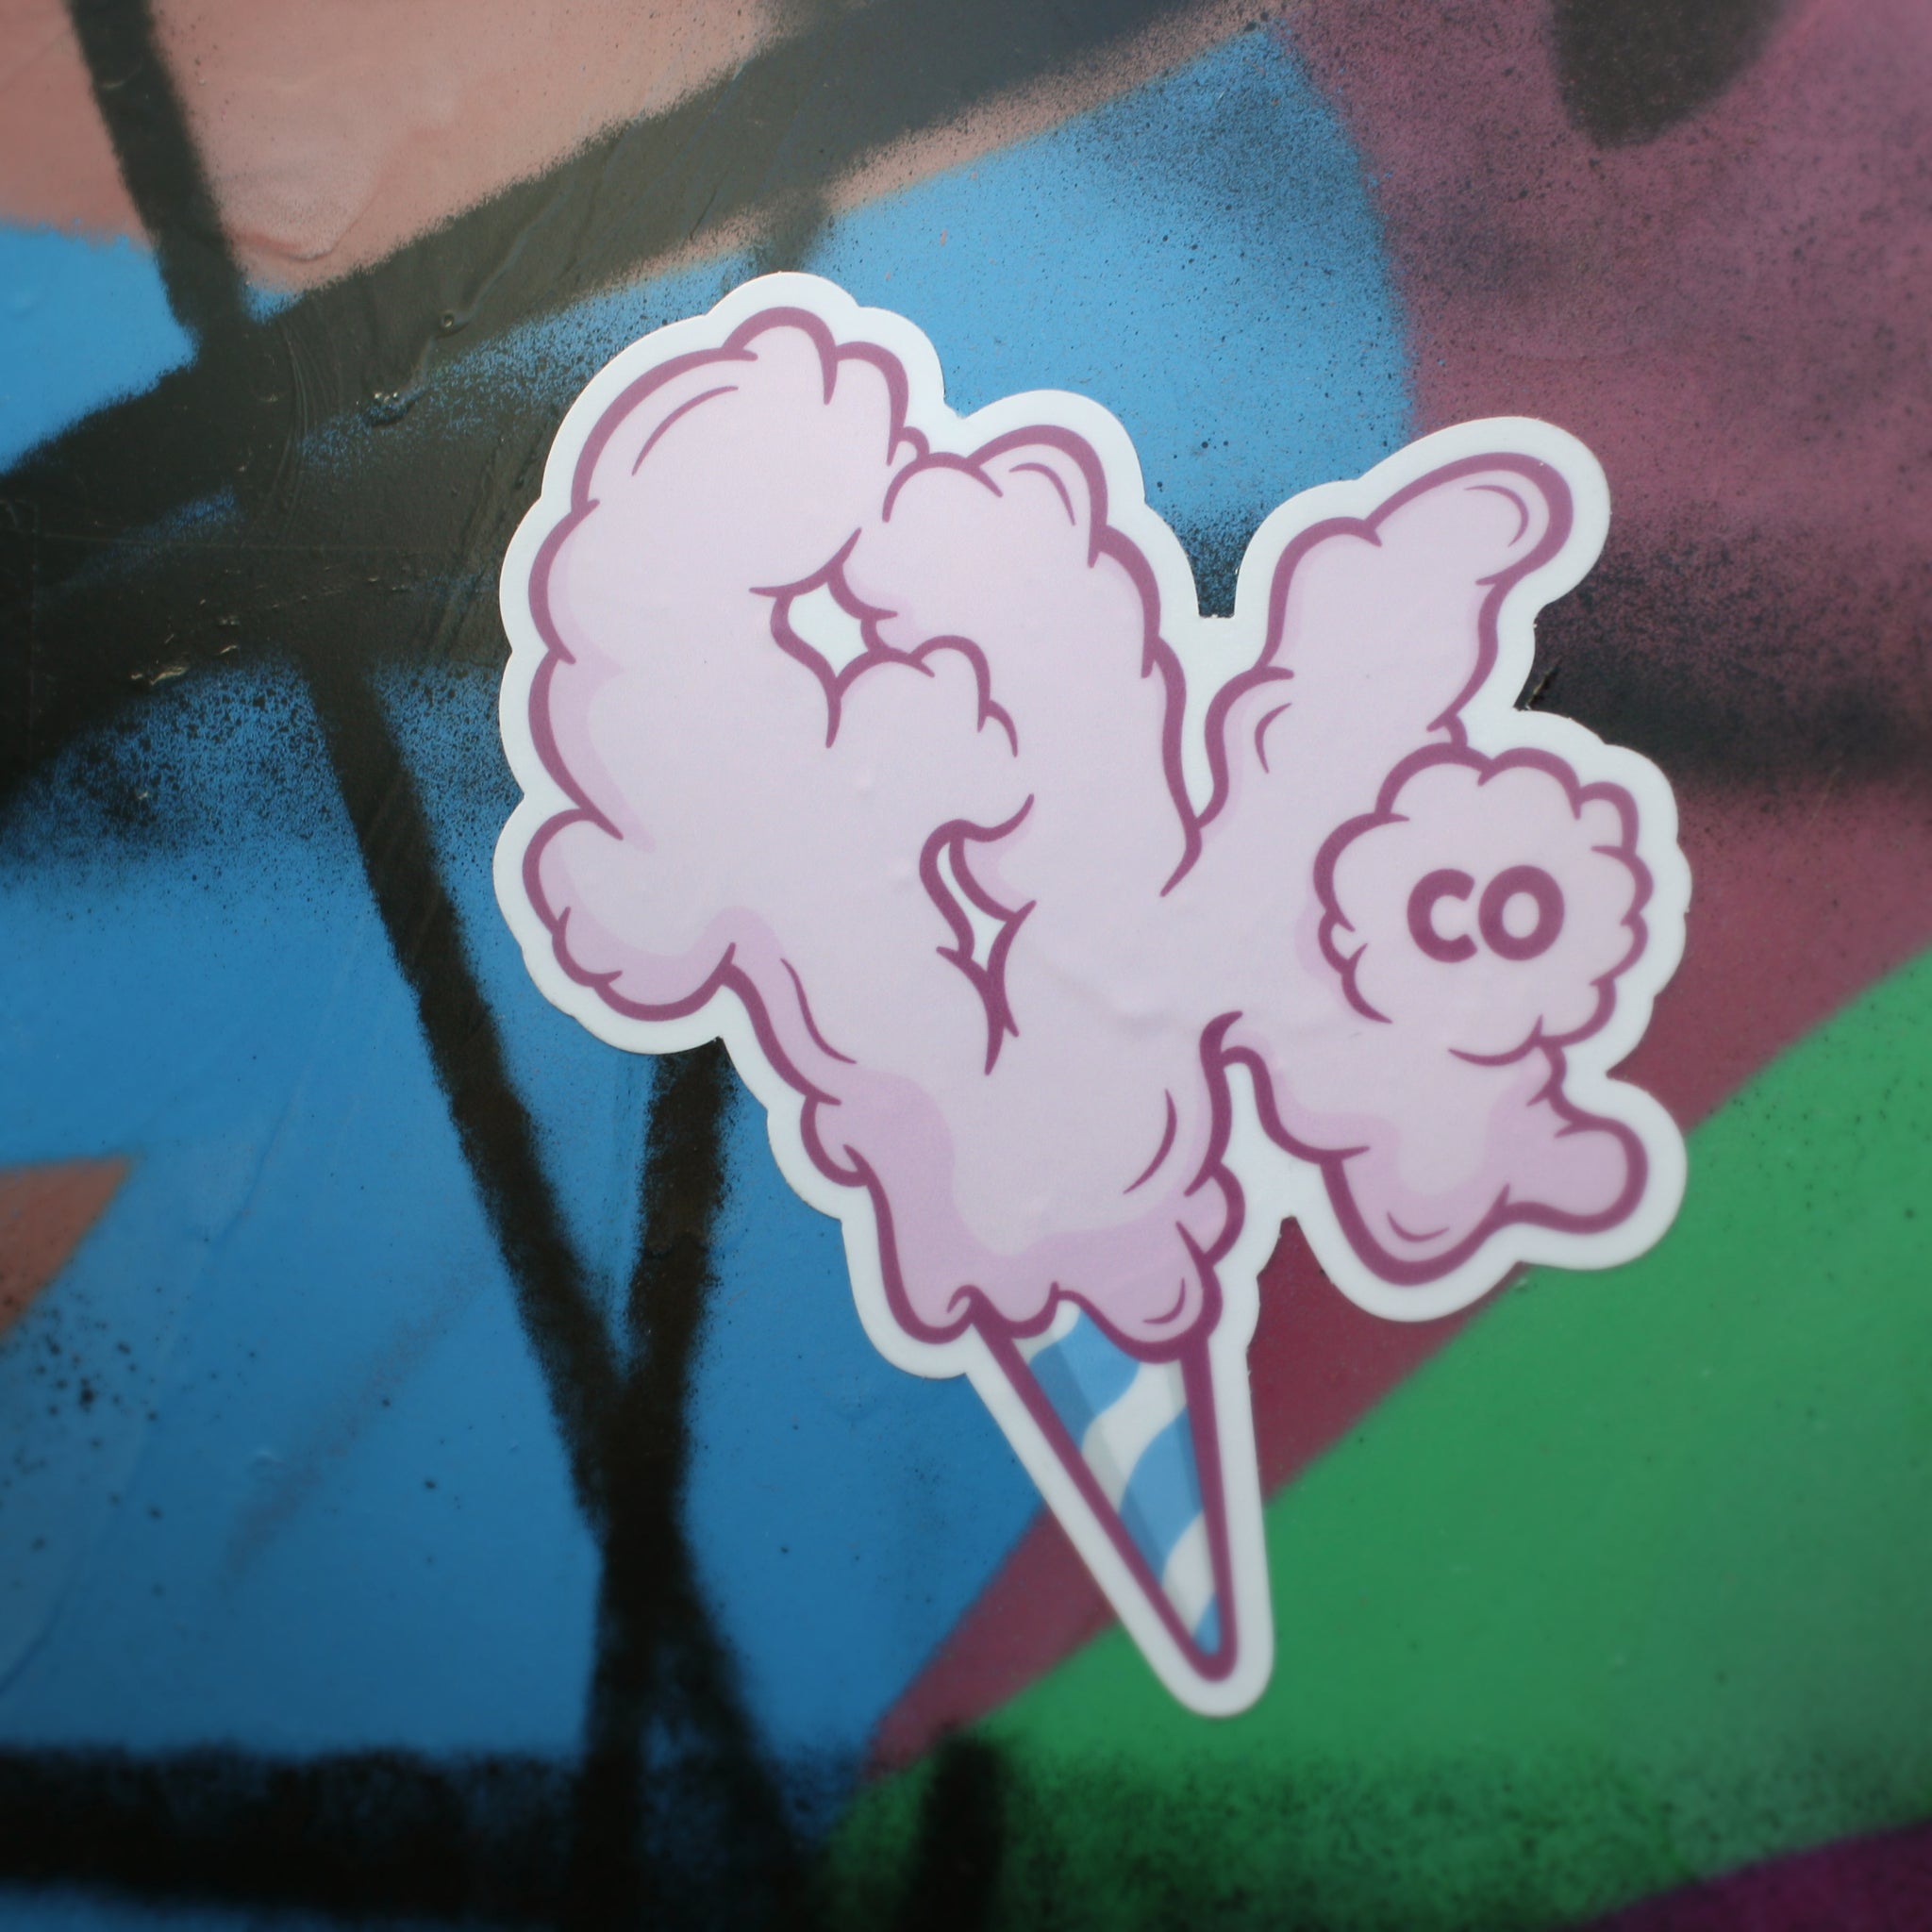 Cotton Candy Stickers (2) – Fat Kid Co